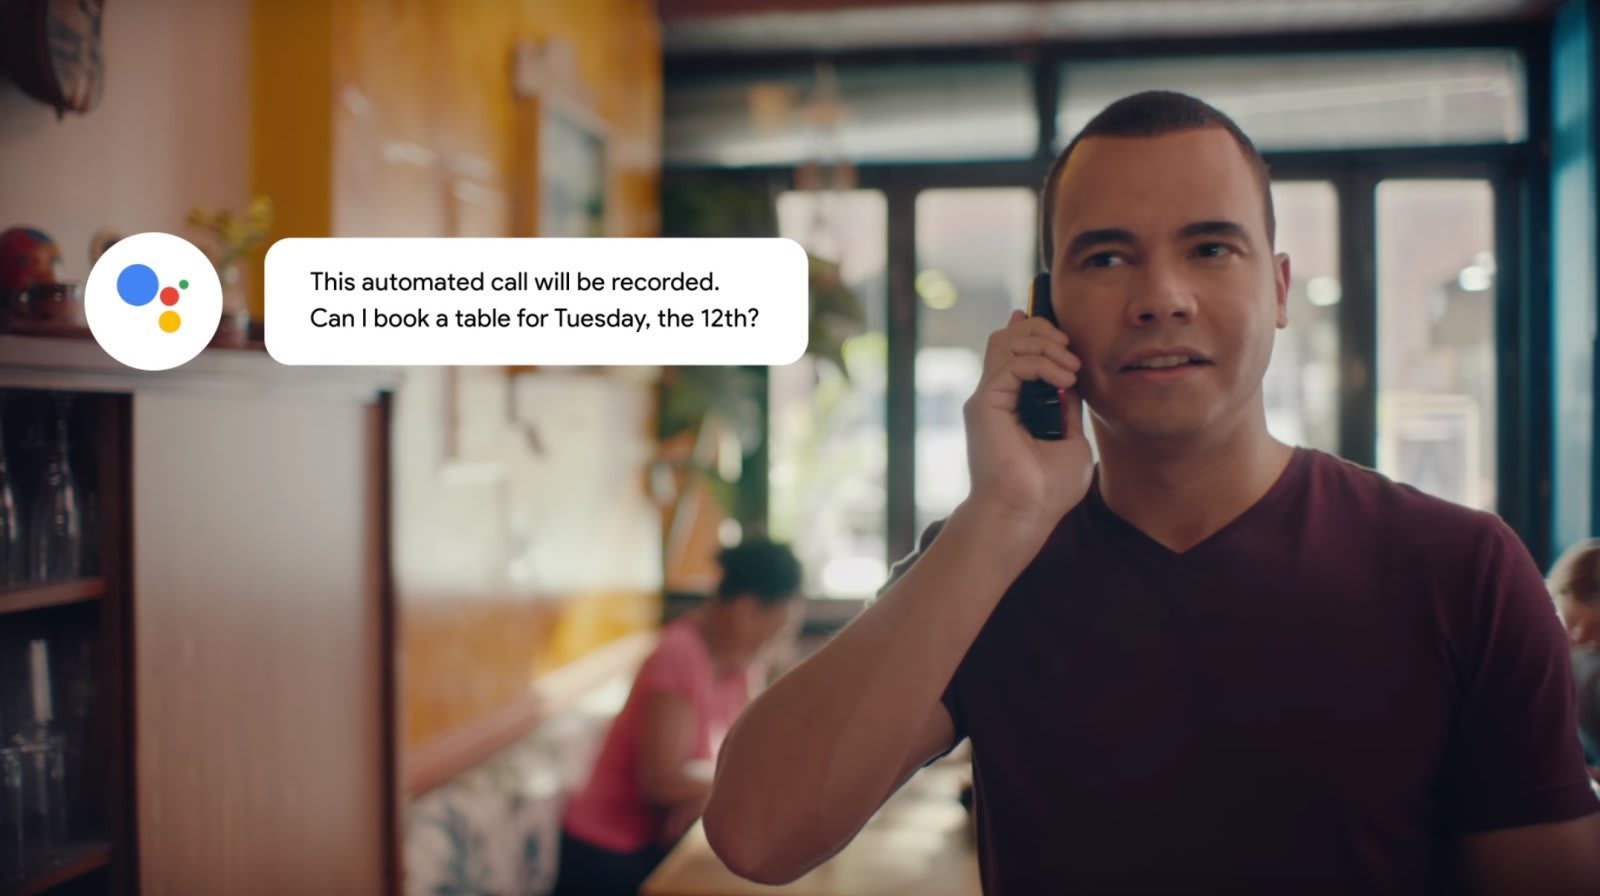 Google's Duplex AI can make reservations on non-Pixel devices1600 x 896